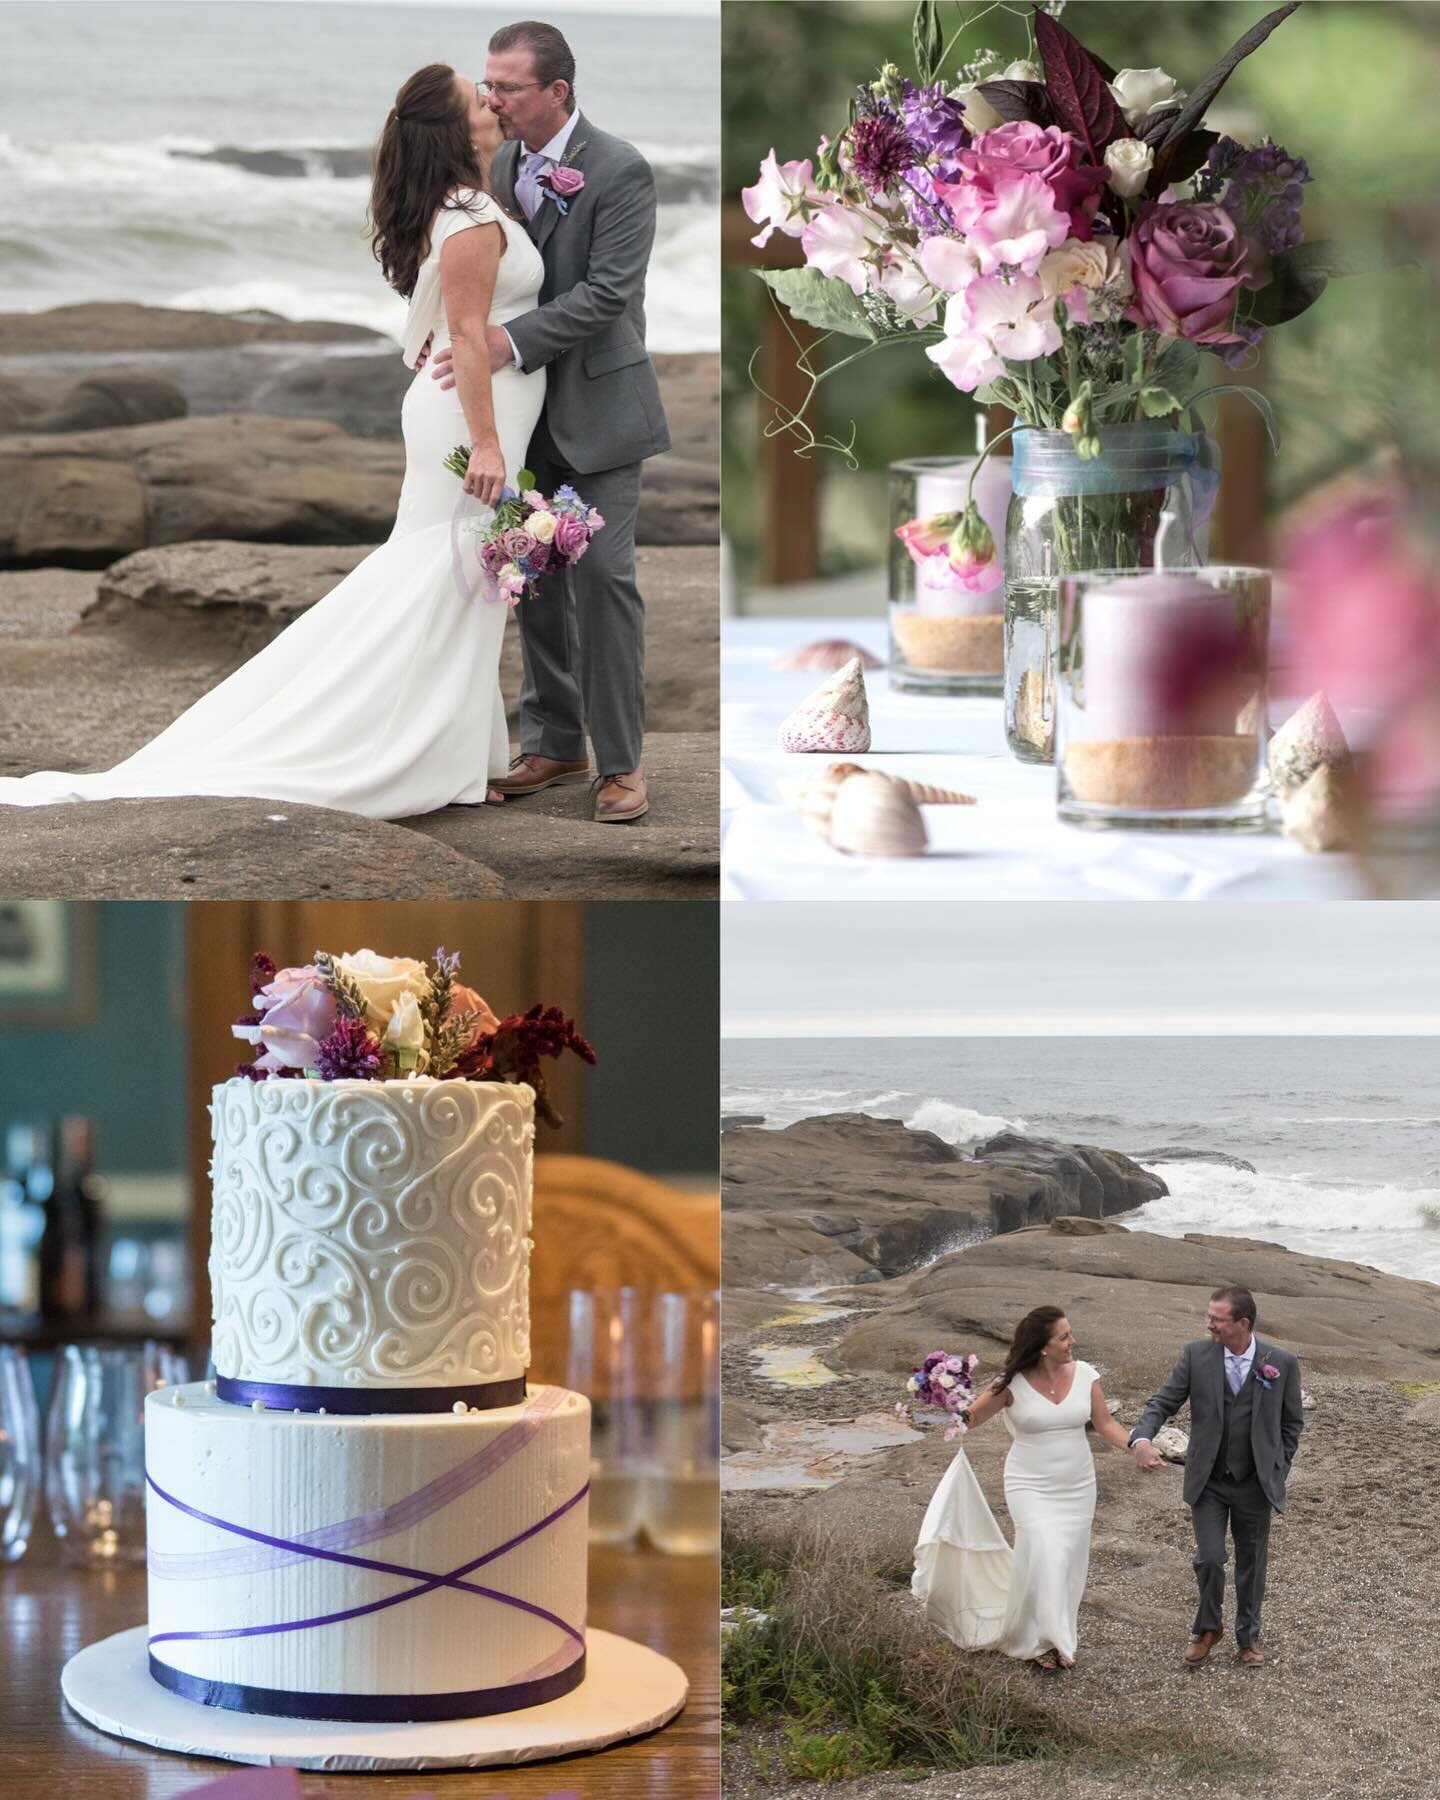 One of the great things about an Oregon Coast wedding is that you can&rsquo;t go wrong no matter what color palette you choose. Natural elements, bright florals, found seashells, or just the ocean as a backdrop make the perfect details.